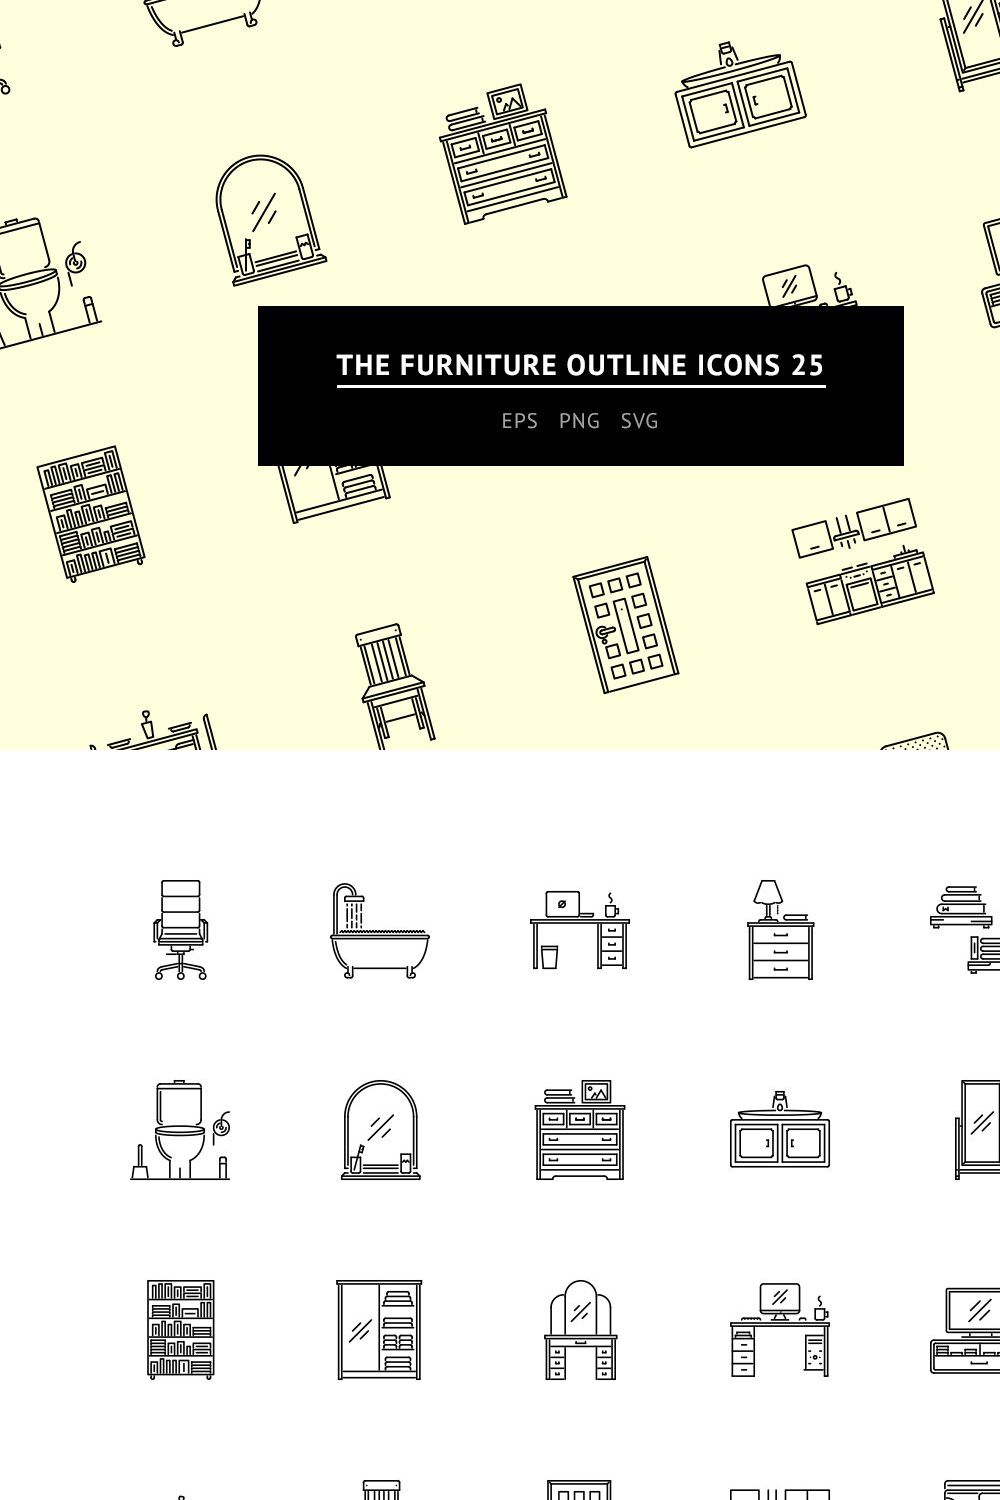 The Furniture Outline Icons 25 pinterest preview image.